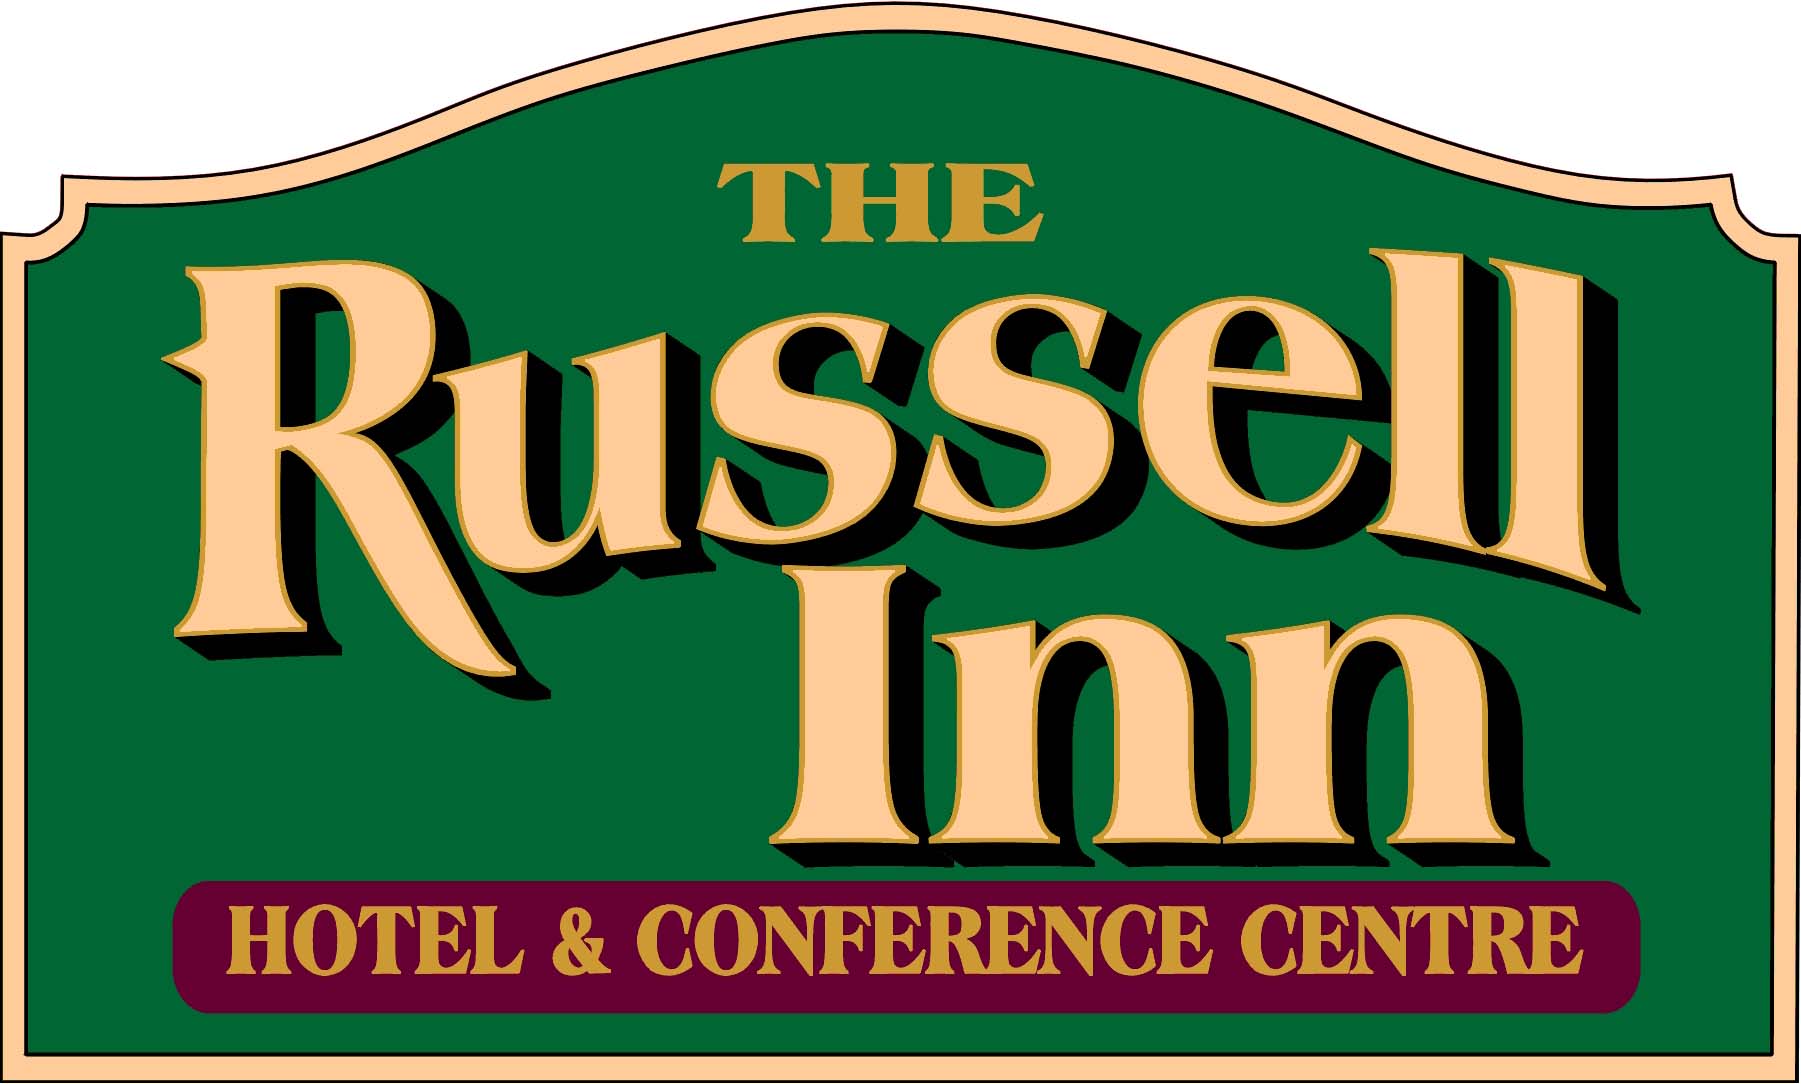 The Russell Inn Hotel & Conference Centre